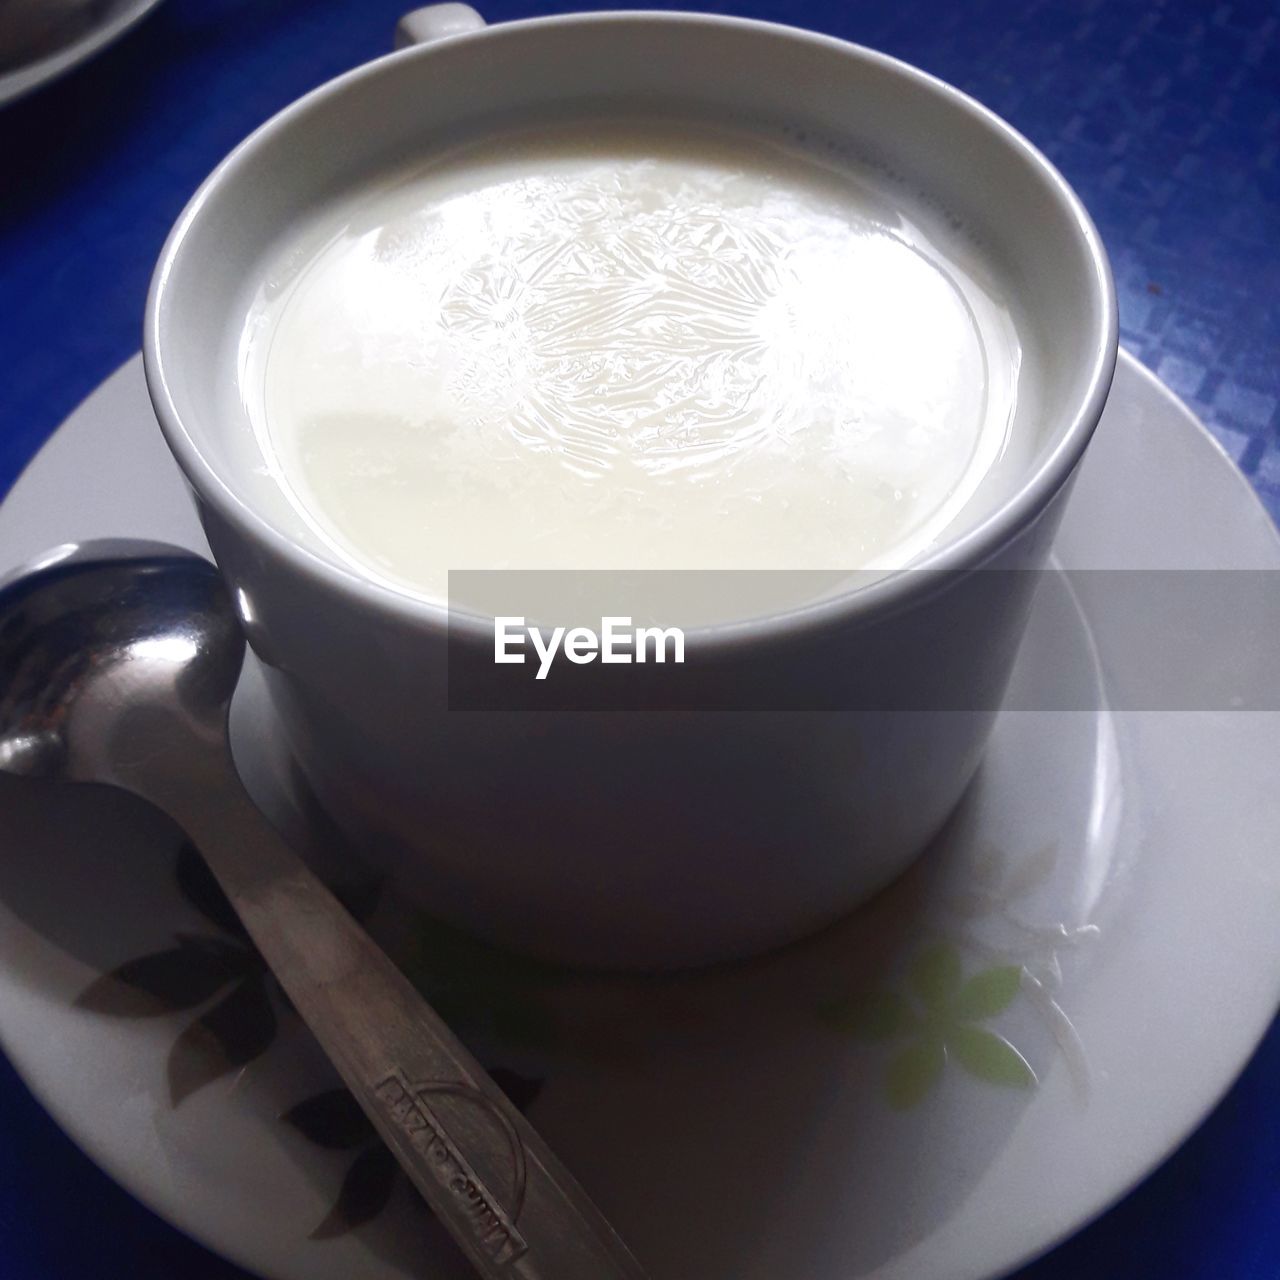 CLOSE-UP OF COFFEE CUP ON TABLE